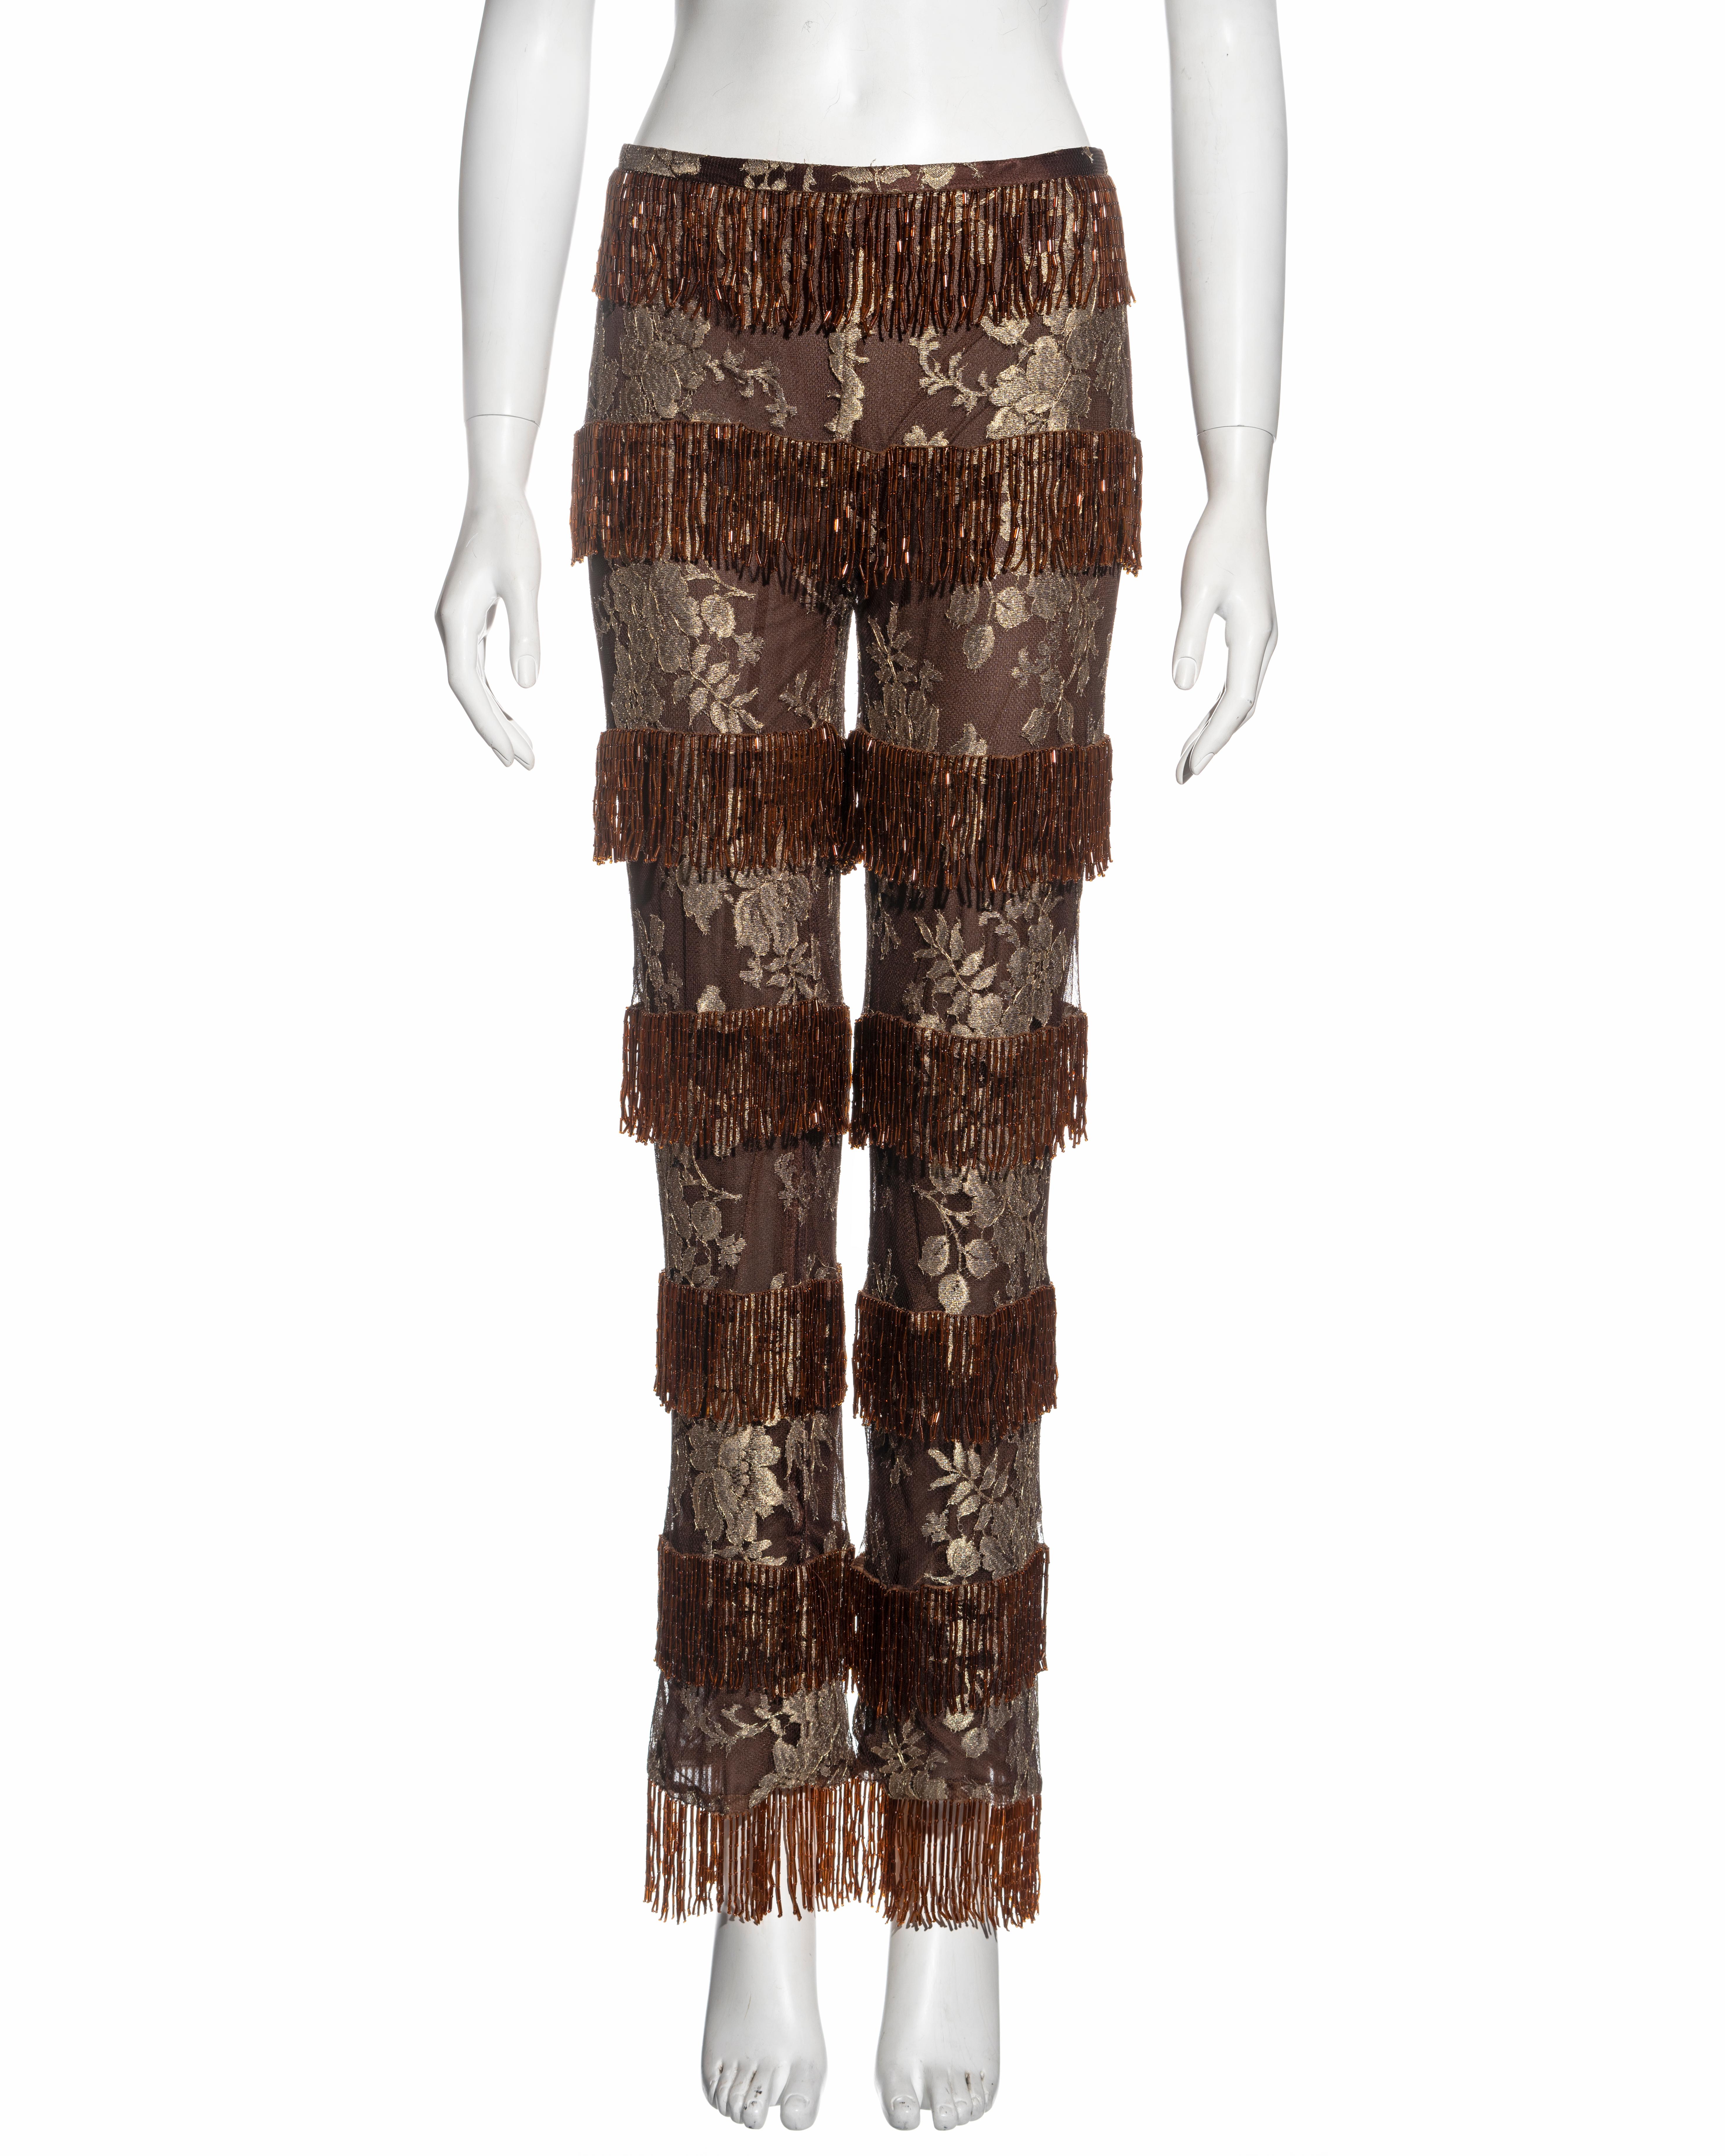 ▪ Dolce & Gabbana evening pants 
▪ Fine antique gold lace 
▪ Copper bugle beaded fringe 
▪ Brown lining 
▪ Straight leg 
▪ IT 42 - FR 38
▪ Spring-Summer 2000
▪ 42% Polyester, 30% Viscose, 28% Nylon
▪ Made in Italy